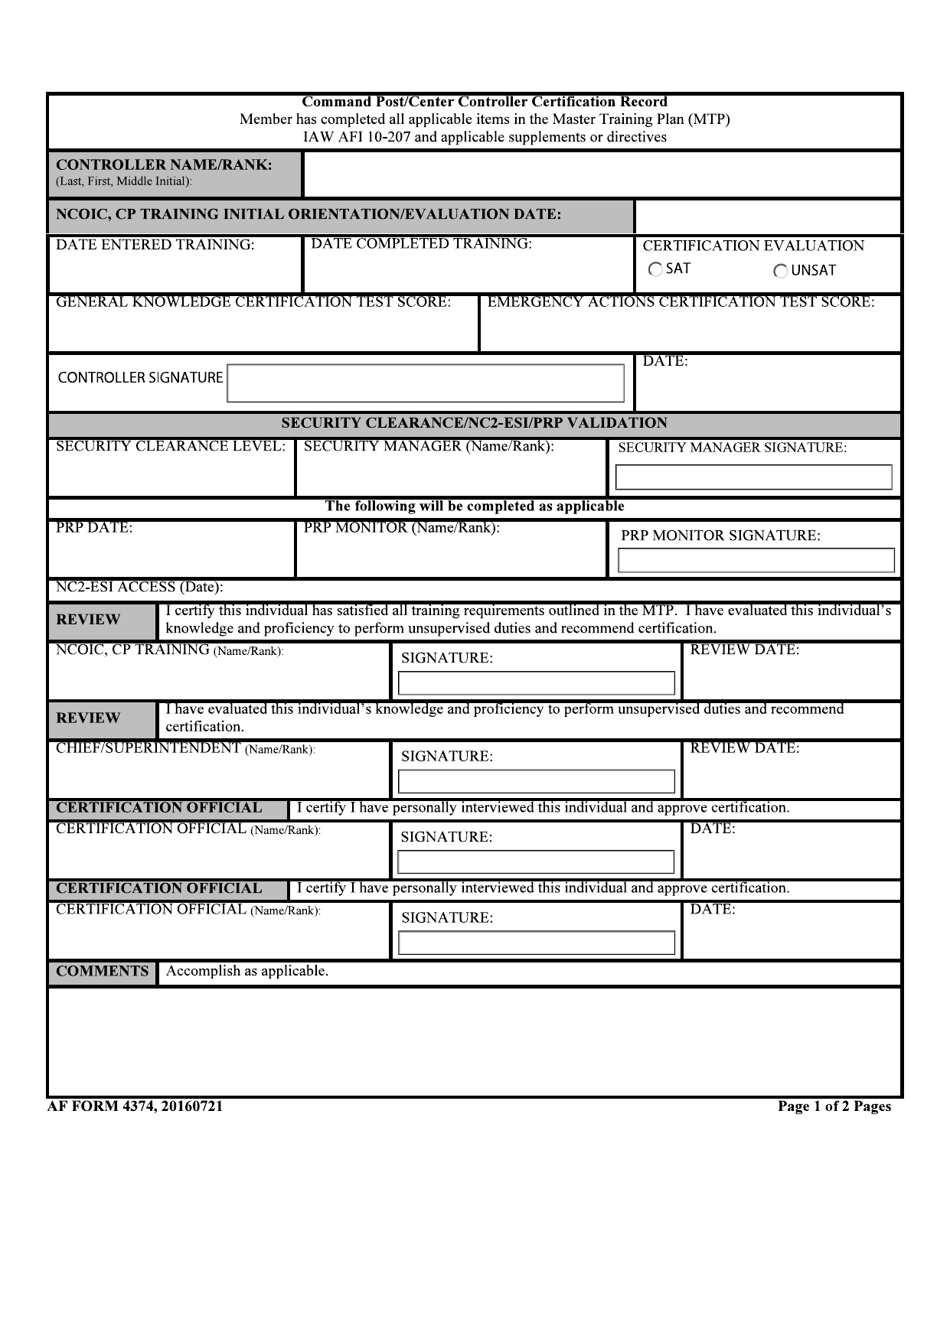 AF Form 4374 Command Post / Center Controller Certification Record, Page 1